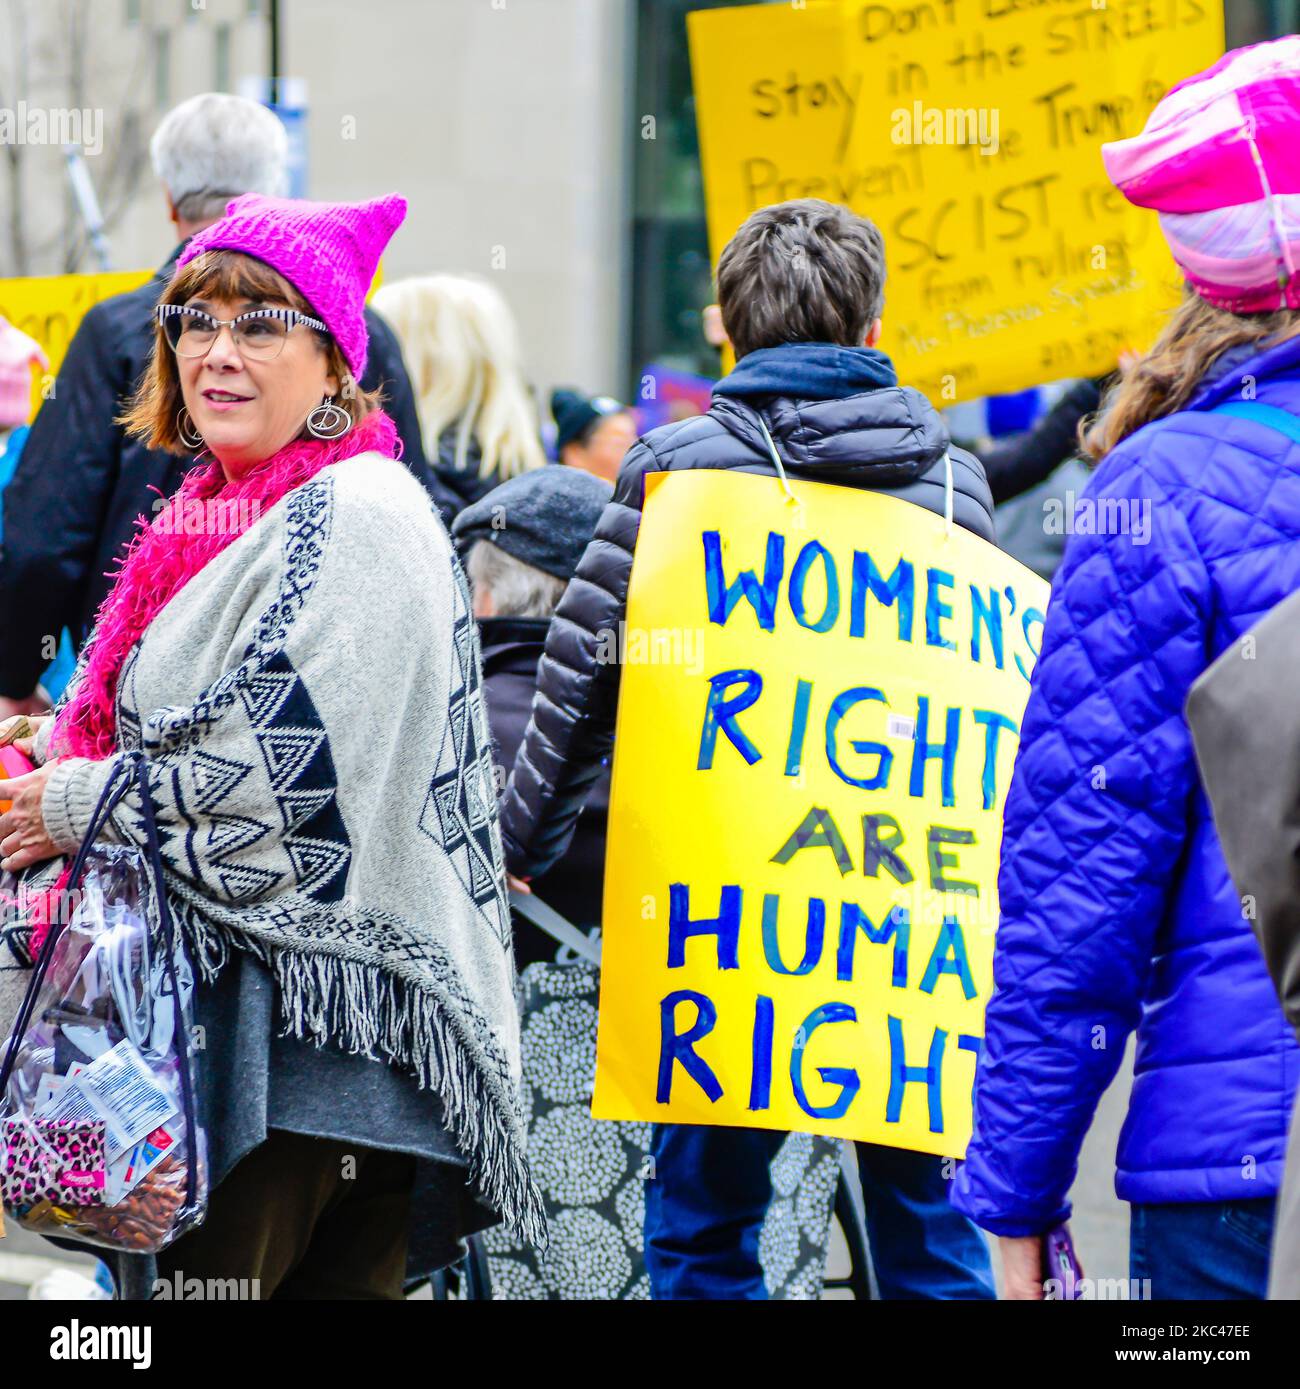 Posterd held by woman, one reads, 'Women's rights are human rights',  fight for Abortion rights, Roe v wade protest, Washington DC Stock Photo